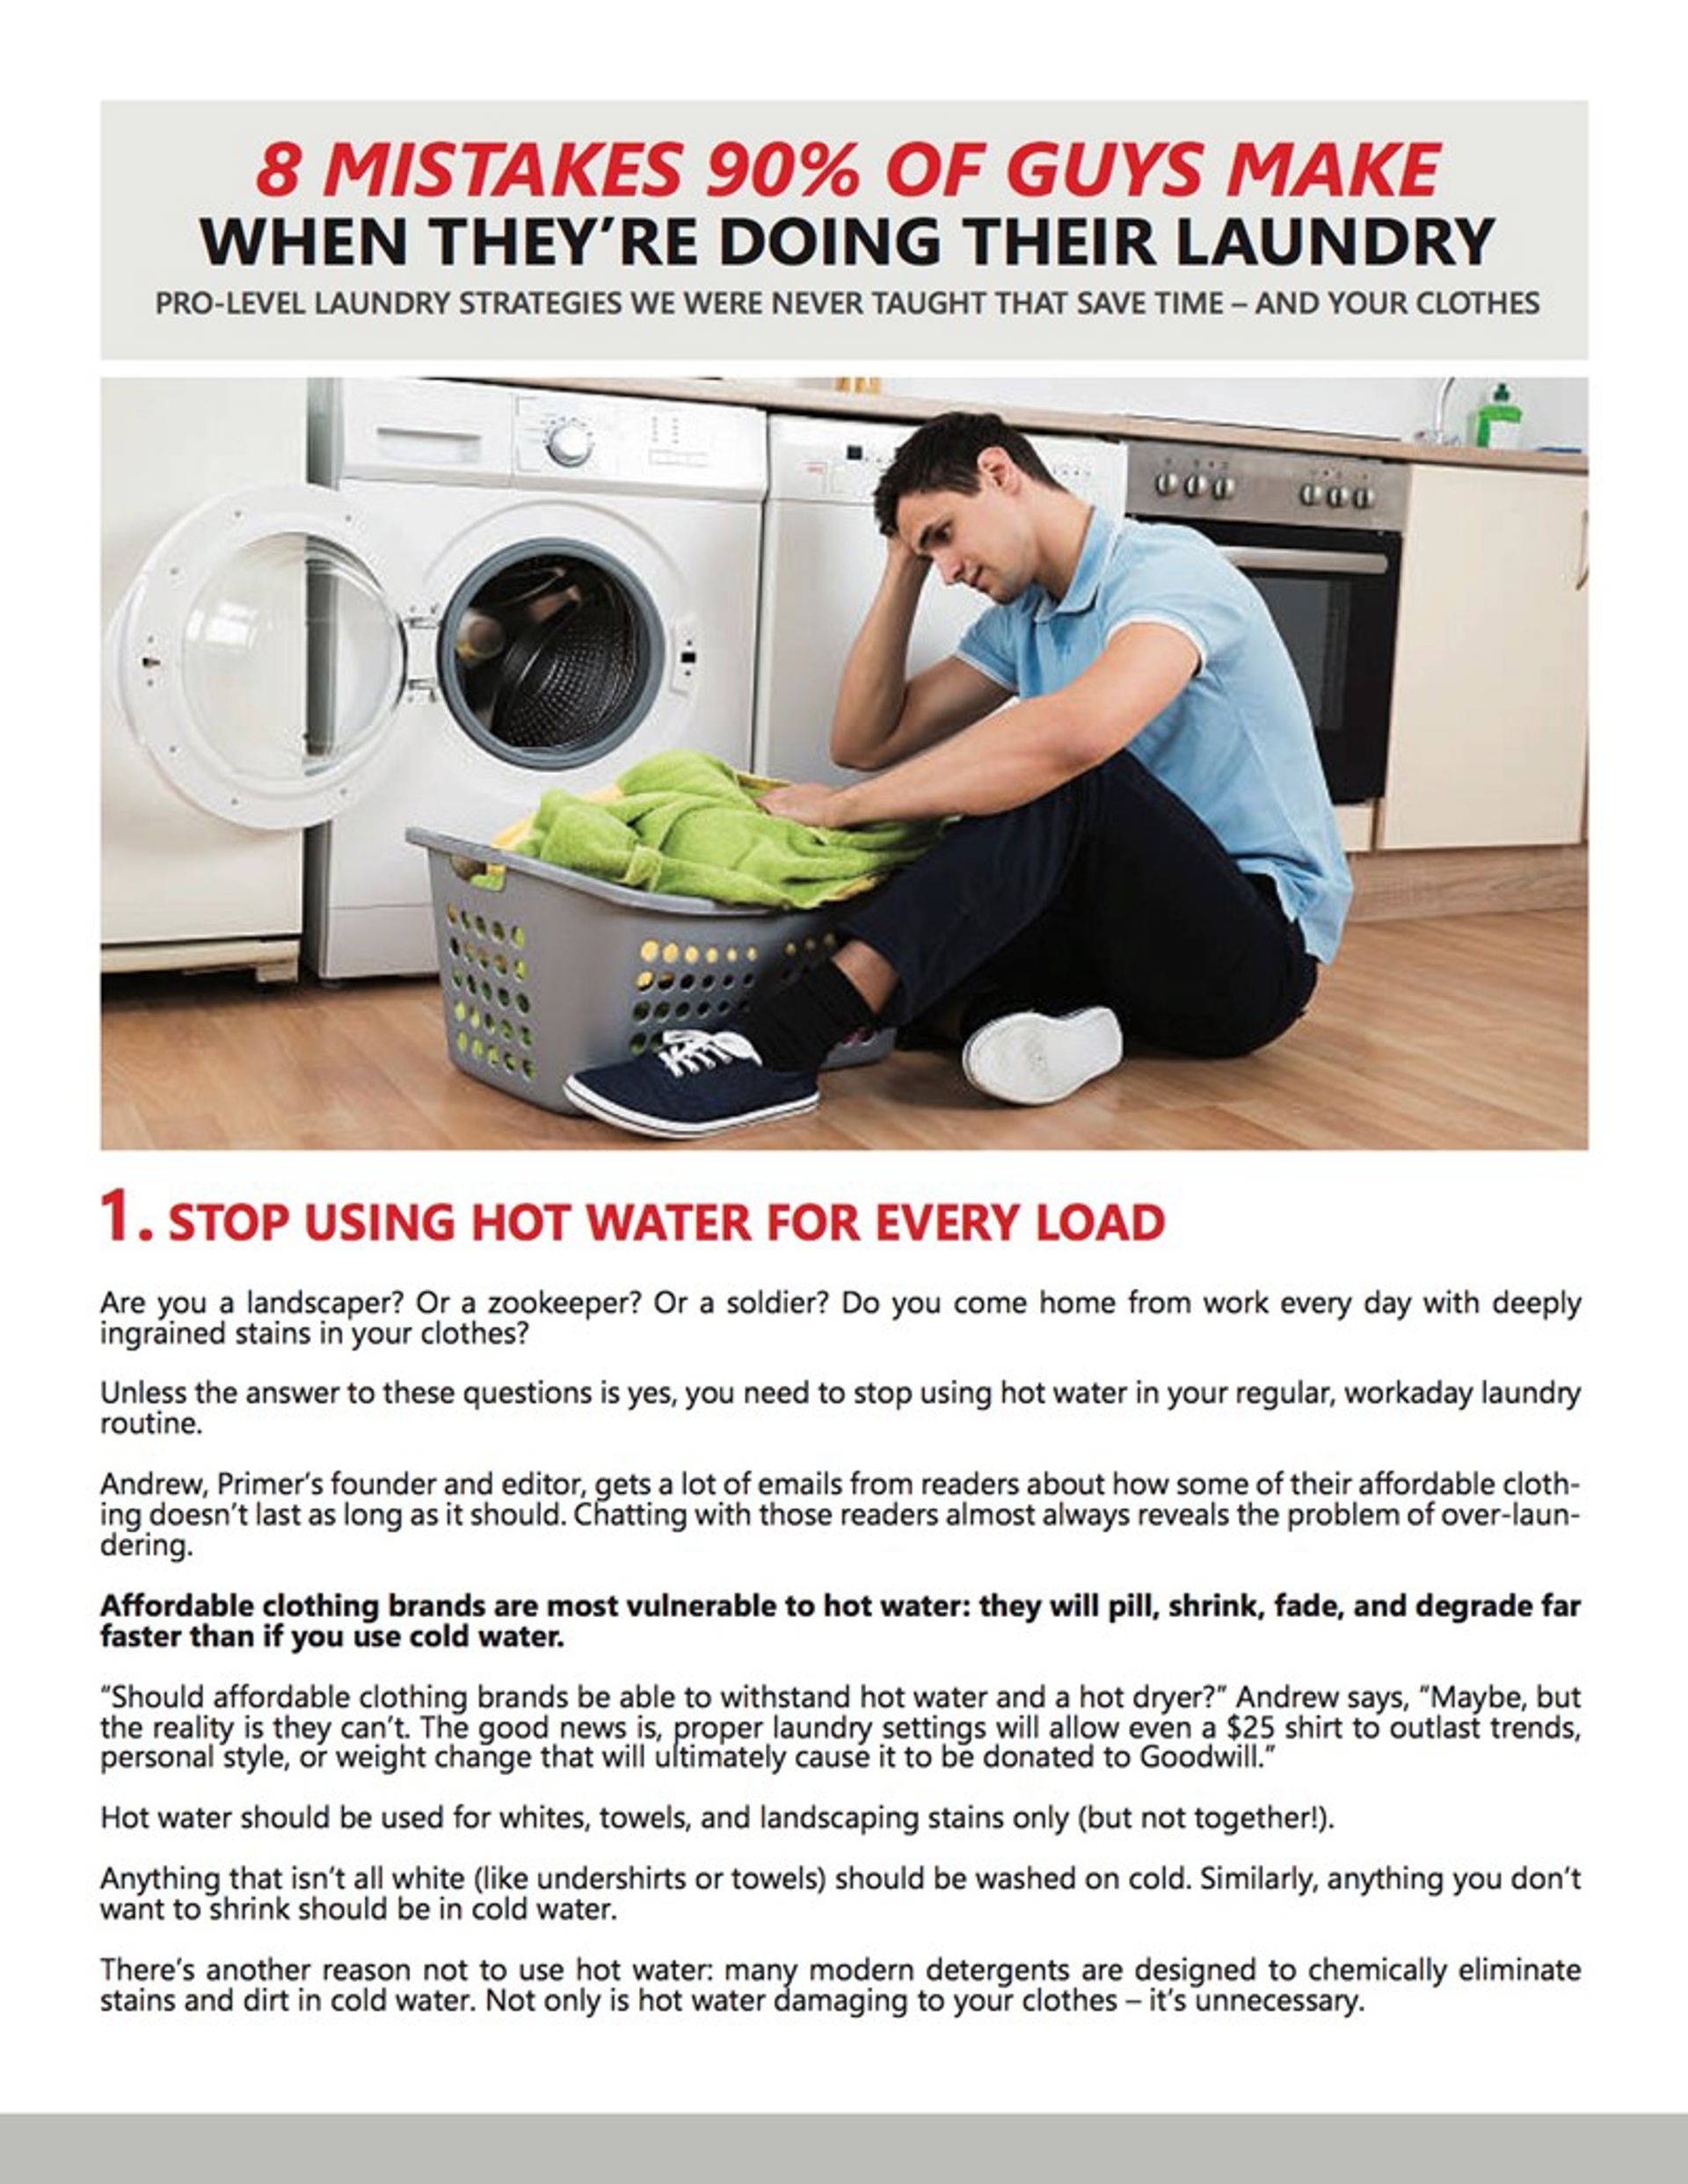 8 MISTAKES 90% OF GUYS MAKING DOING LAUNDRY | Half Price Laundromat ...